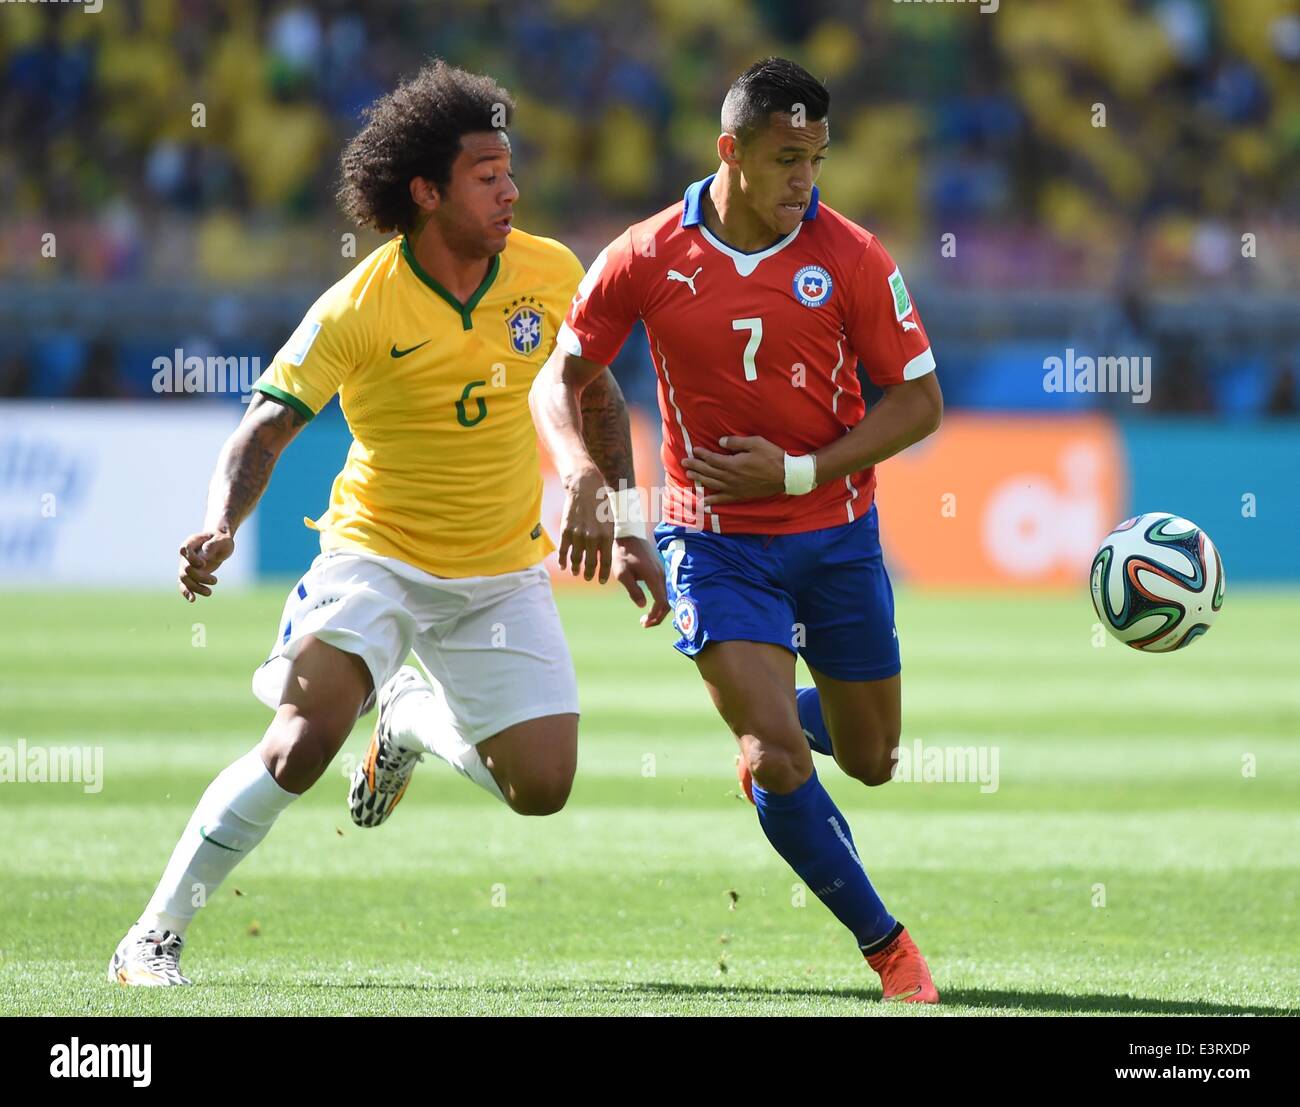 Belo Horizonte, Brazil. 28th June, 2014. Brazil's Marcelo vies with Chile's Alexis Sanchez during a Round of 16 match between Brazil and Chile of 2014 FIFA World Cup at the Estadio Mineirao Stadium in Belo Horizonte, Brazil, on June 28, 2014. Credit:  Liu Dawei/Xinhua/Alamy Live News Stock Photo